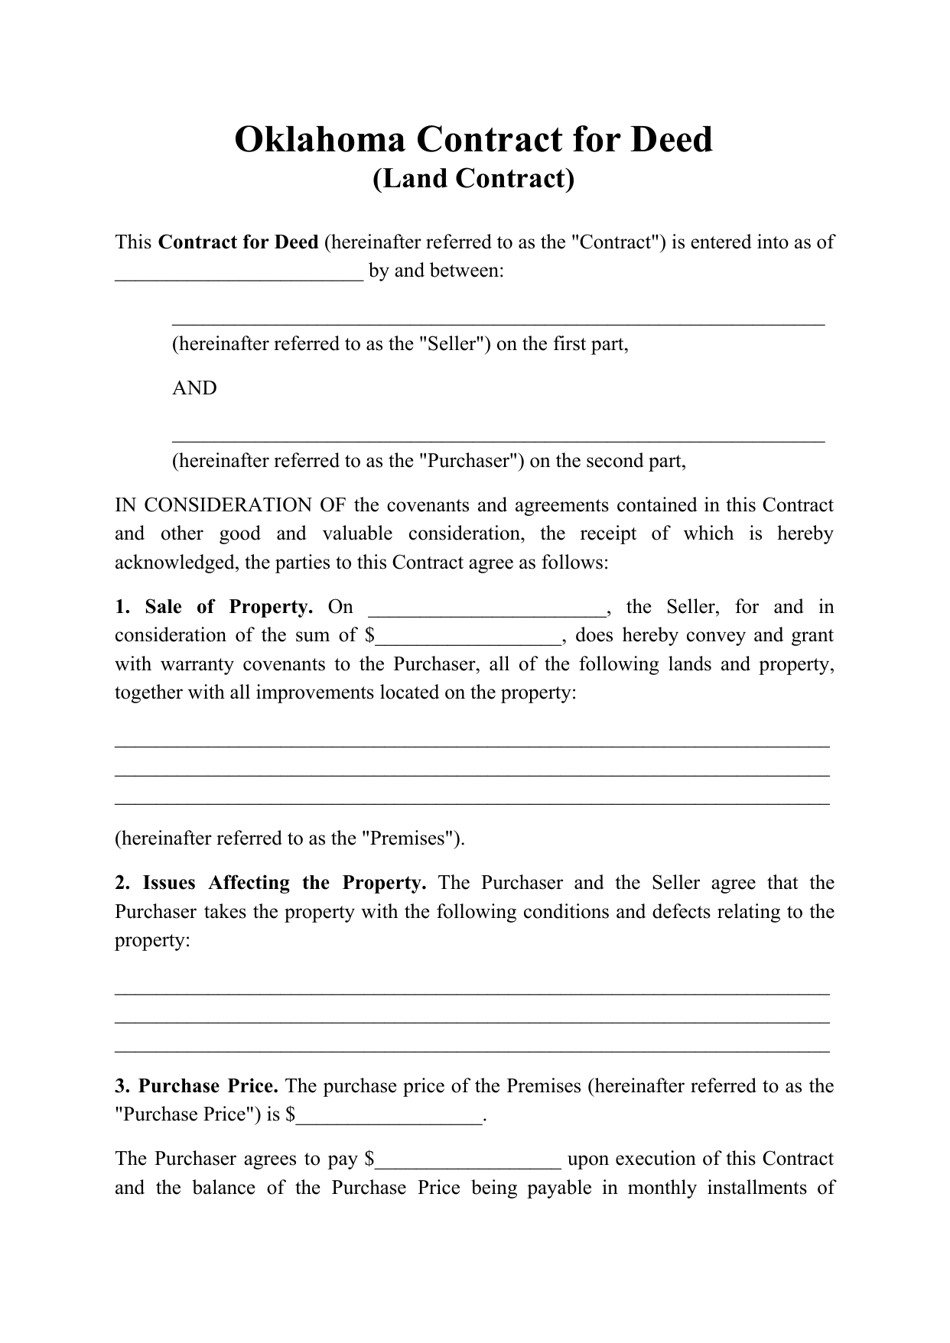 oklahoma-contract-for-deed-land-contract-download-printable-pdf